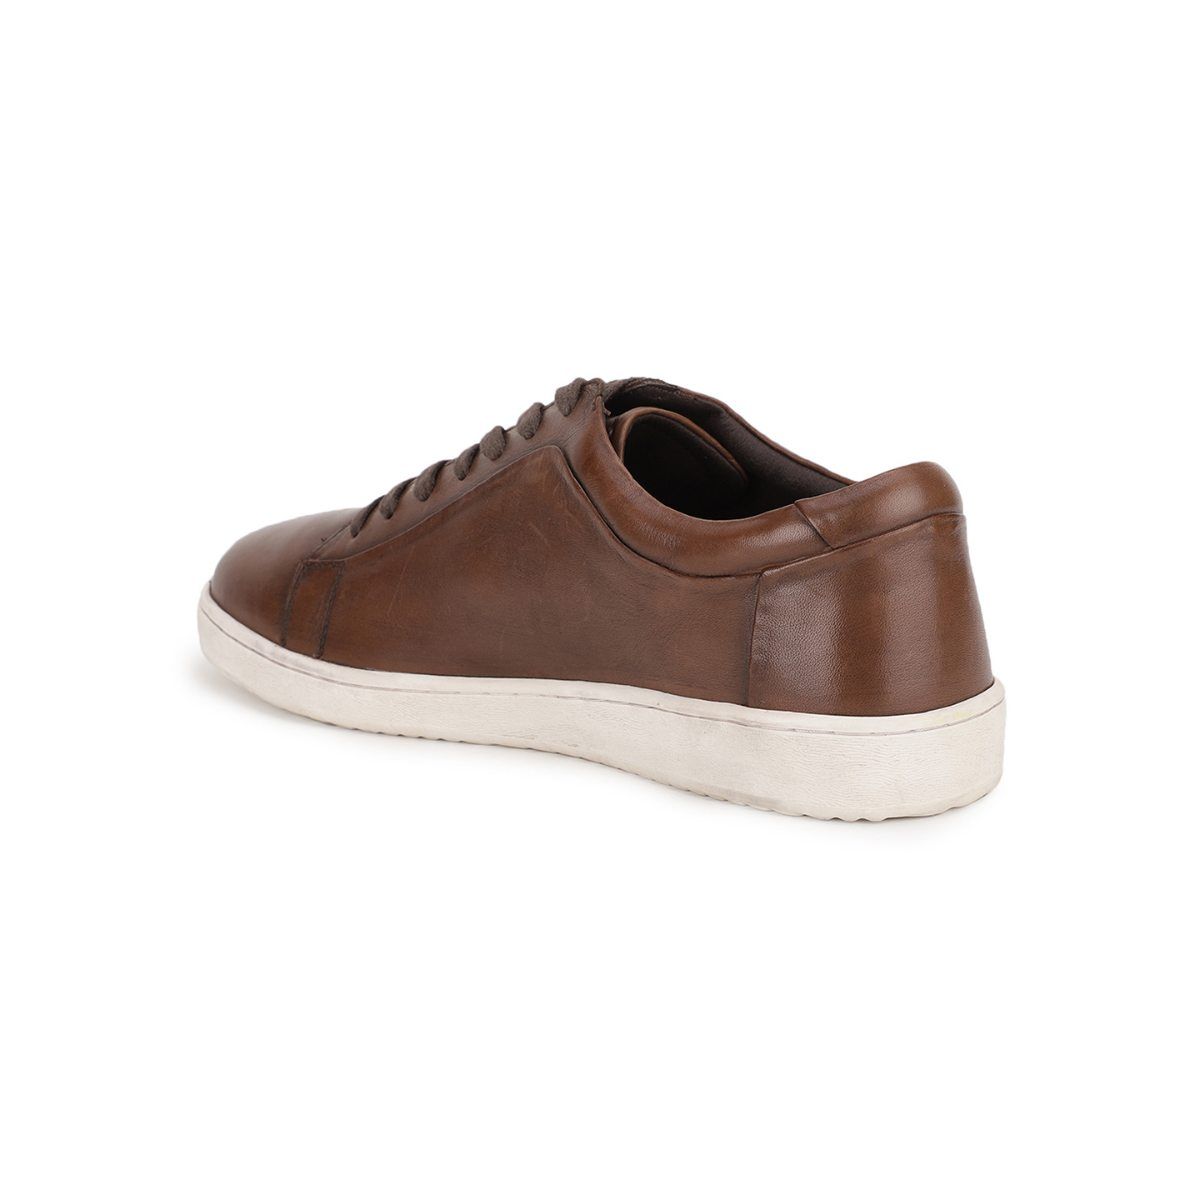 Hush Puppies Gus Tan Leather – FITOS SHOES INC